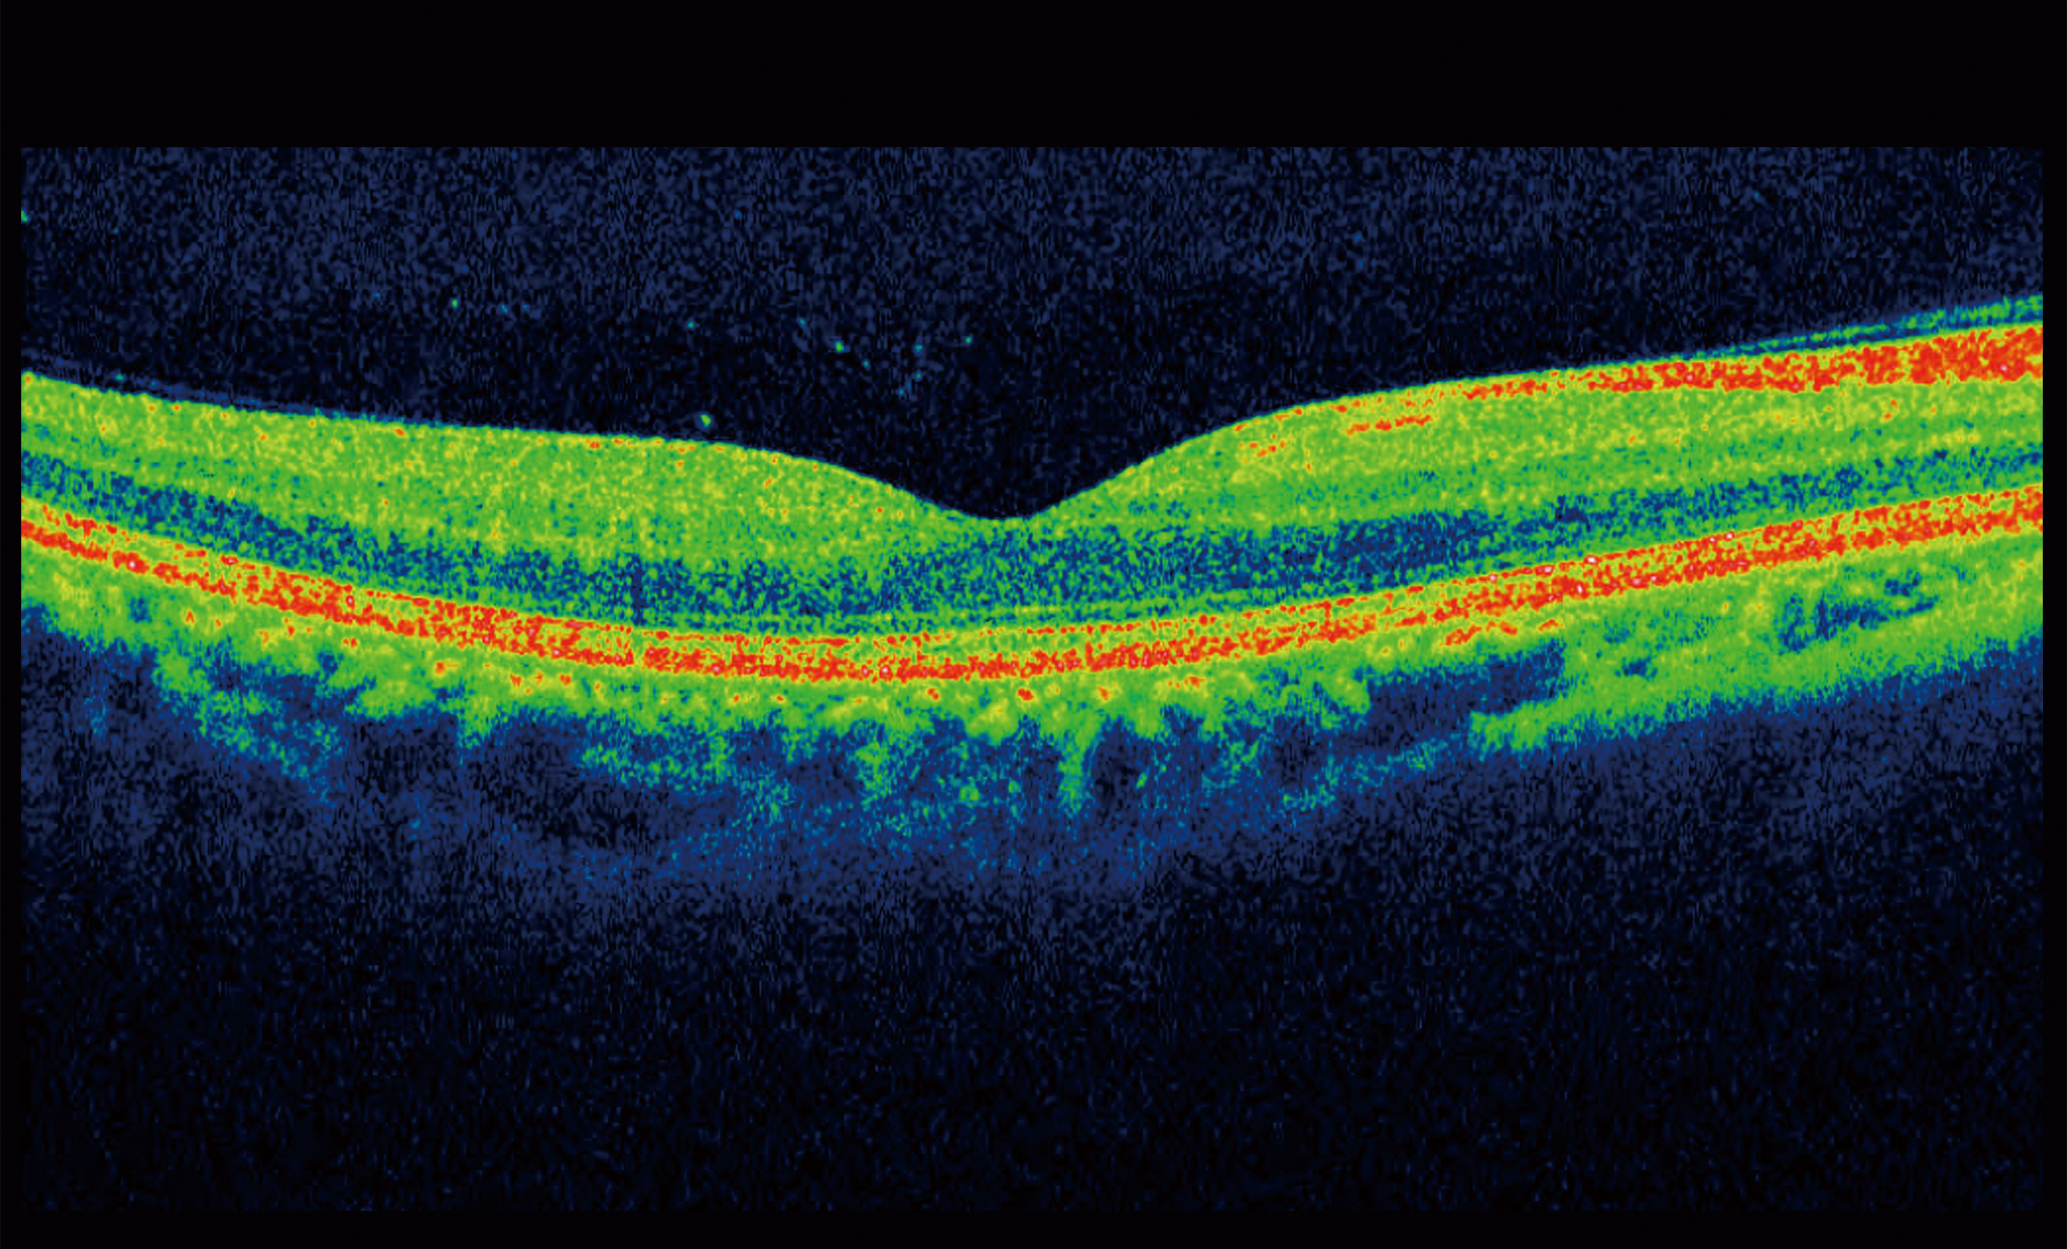 Image of Optical Coherence Tomography scan